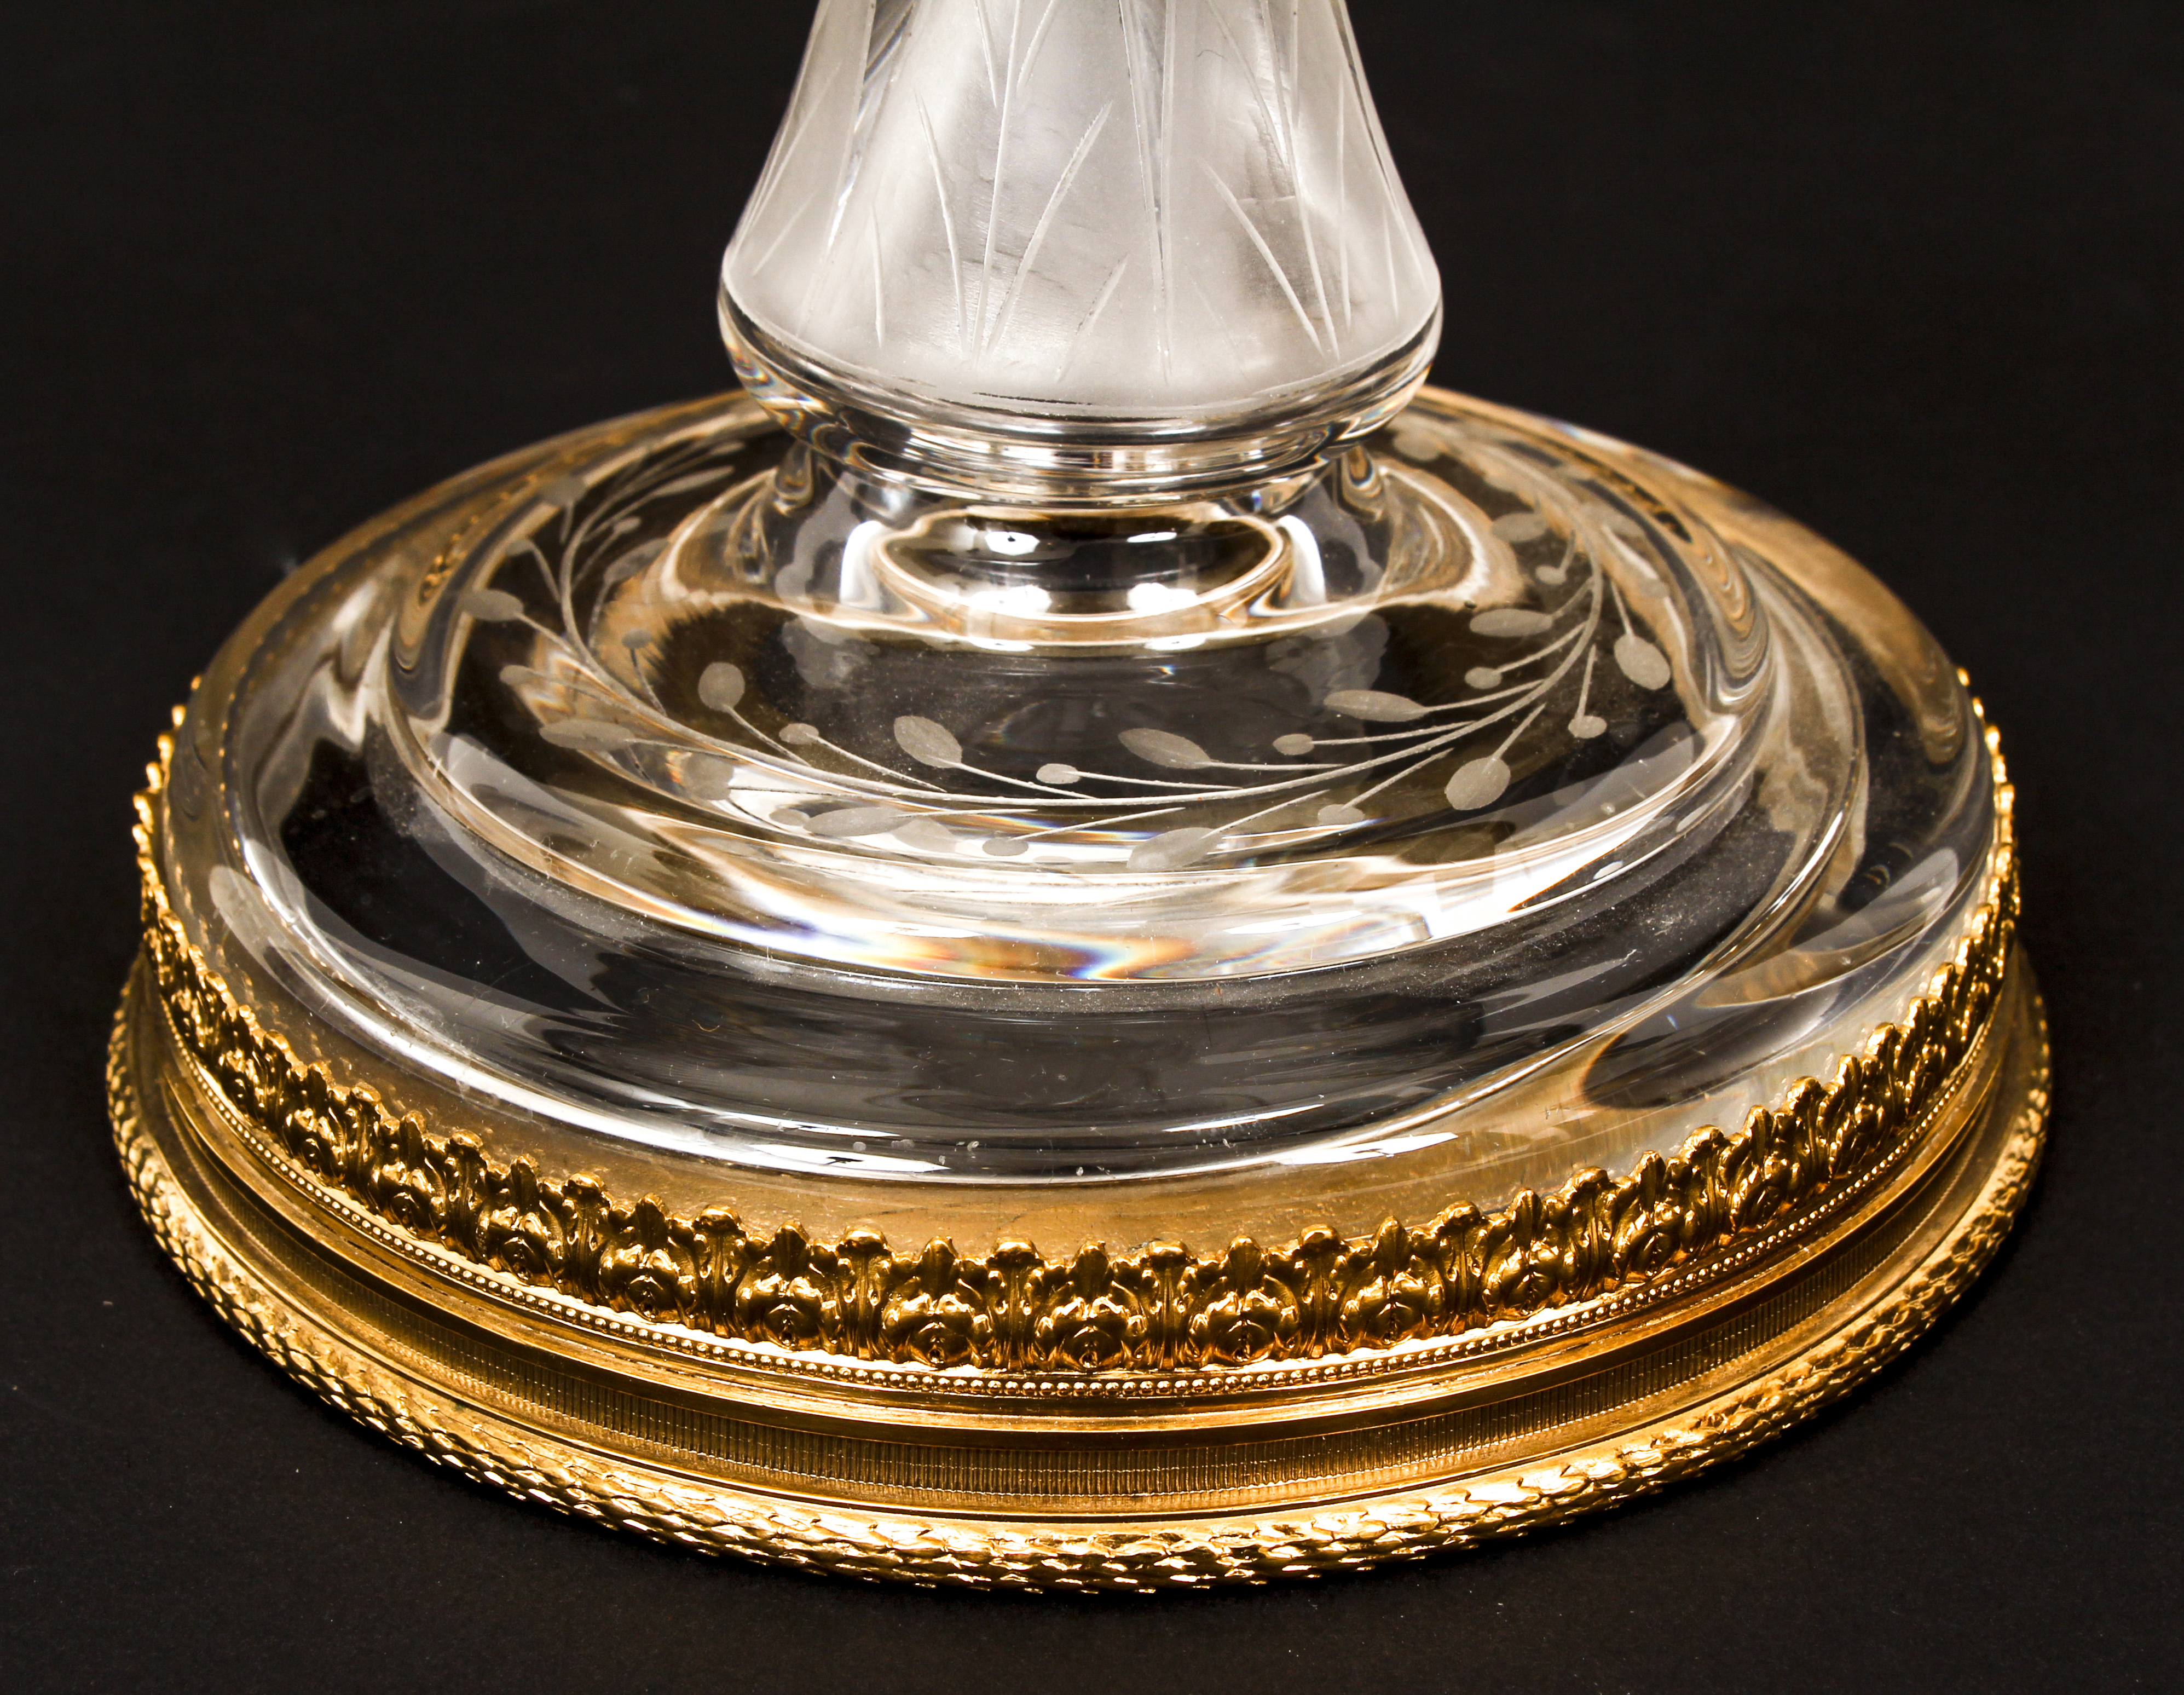 French Ormolu Mounted Cut Glass Centerpiece Bowl - Image 2 of 6